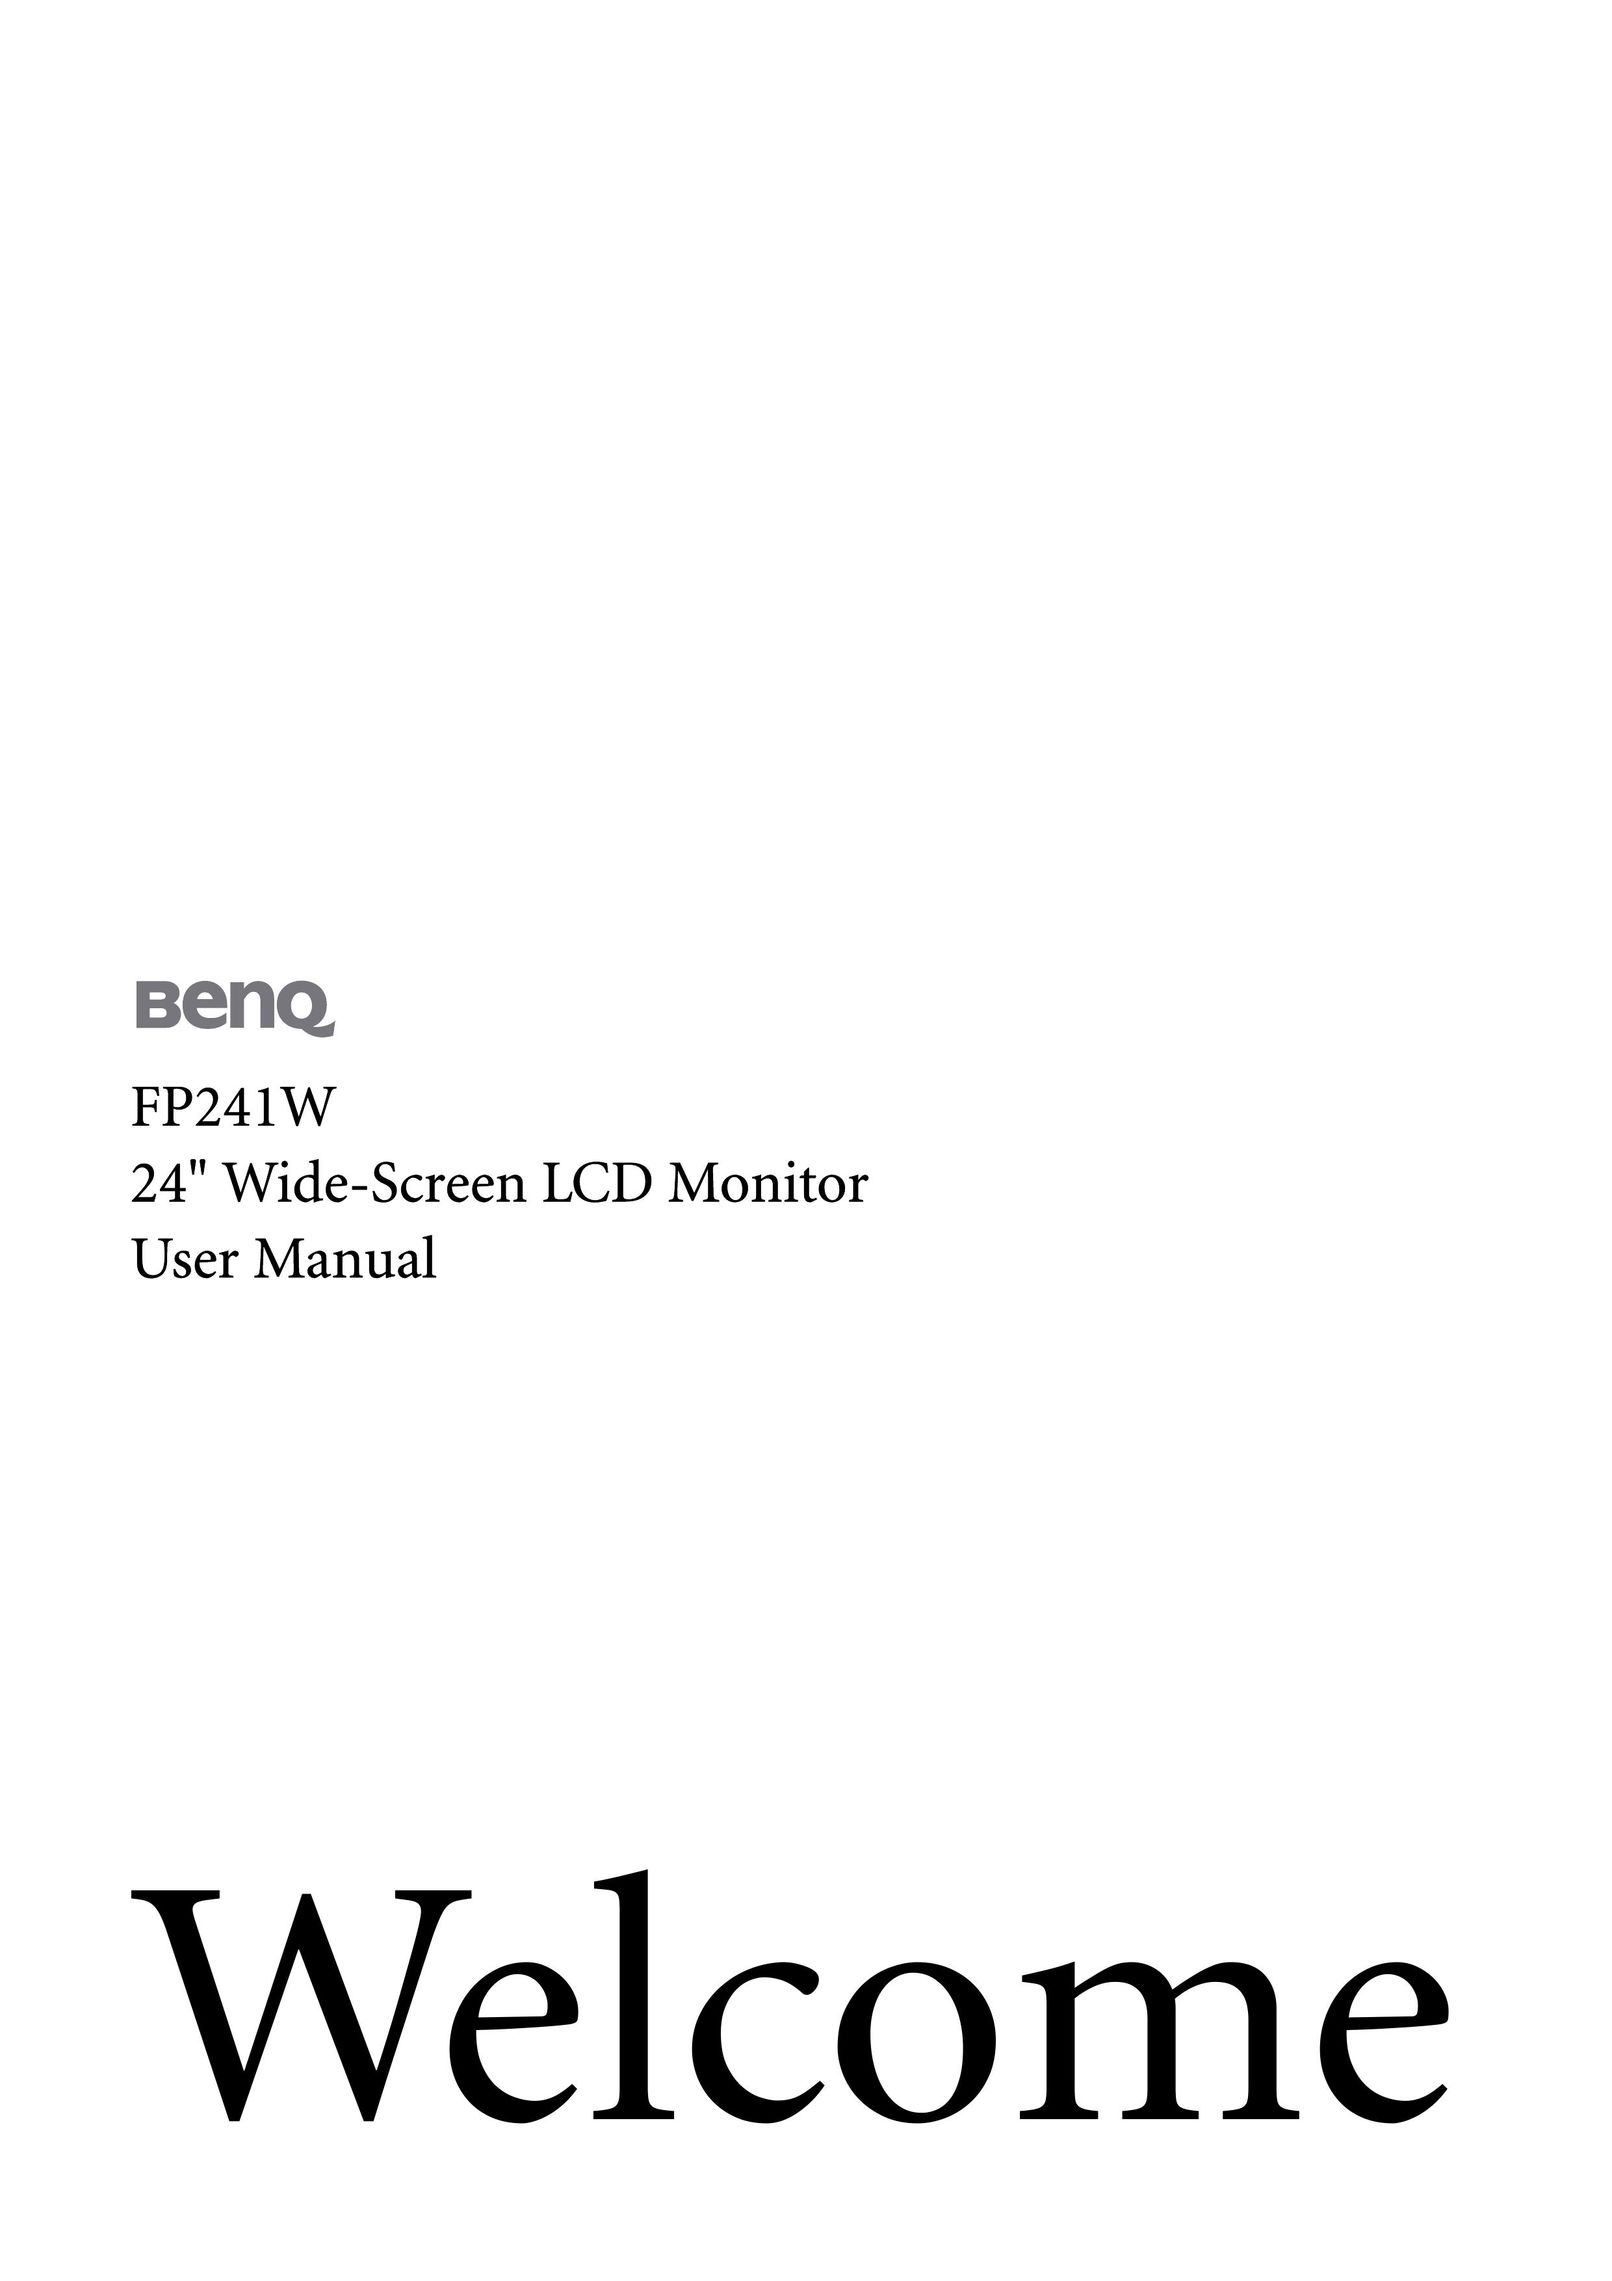 BenQ FP241W Computer Monitor User Manual (Page 1)